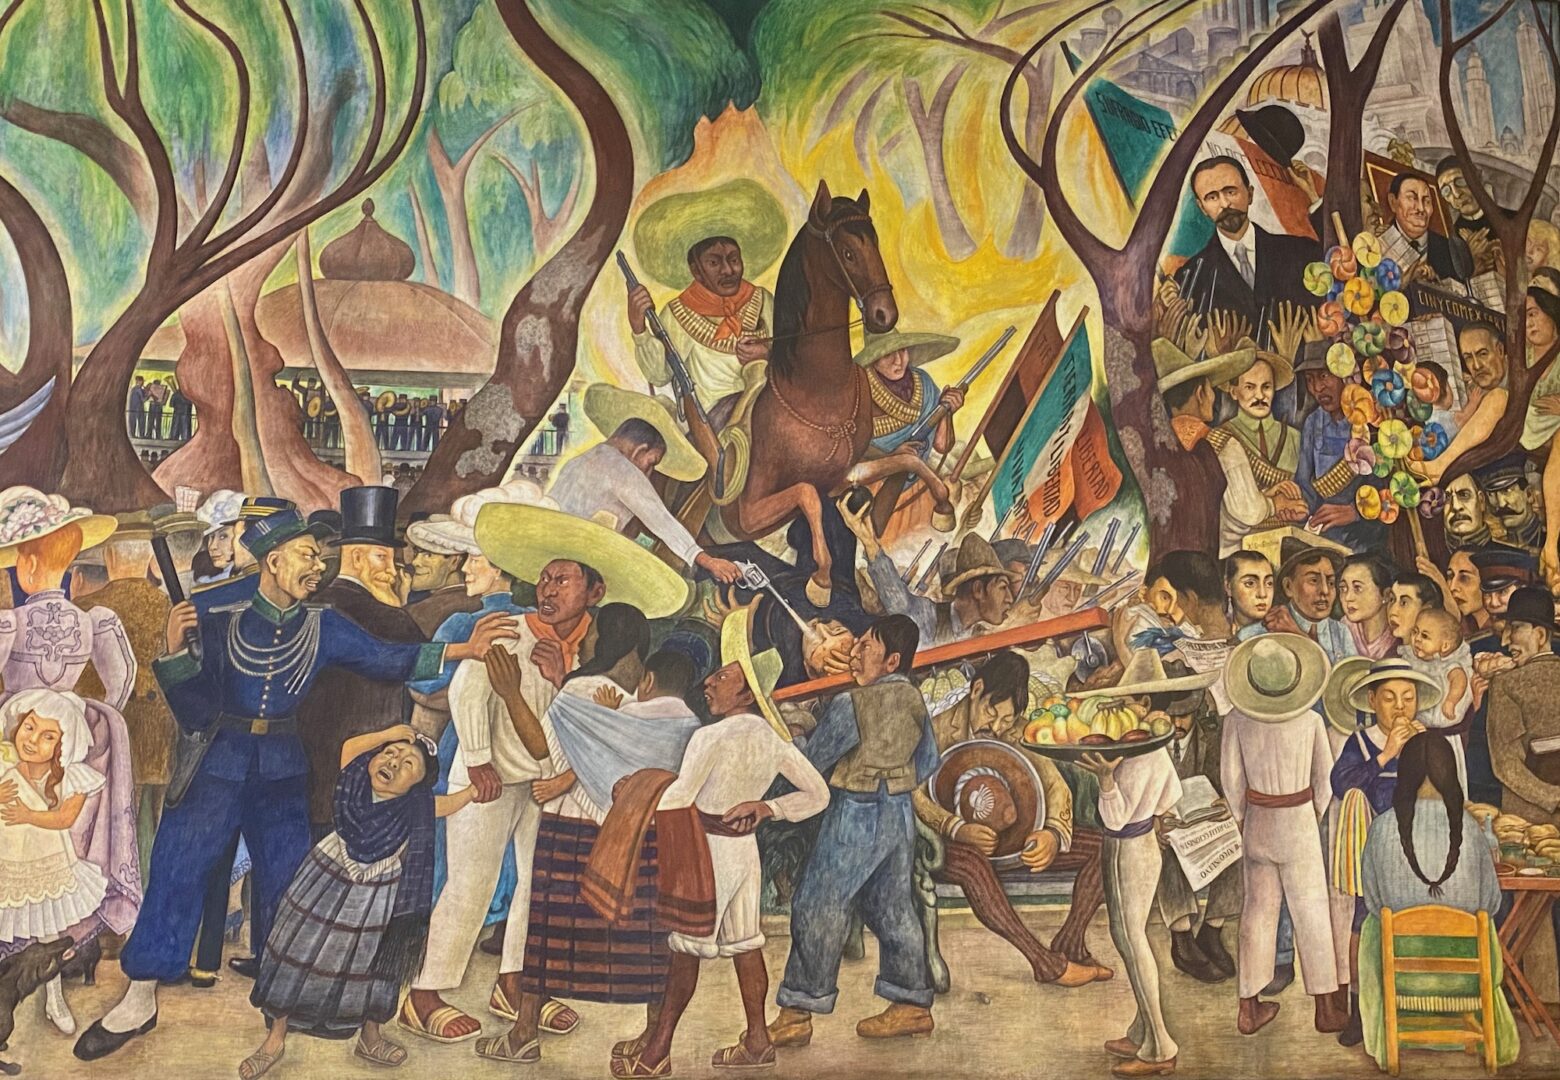 Diego Rivera, "Dream of A Sunday Afternoon in the Alameda Central," (detail) Museo Mural Diego Rivera, Centro Histórico, Mexico City, Mexico